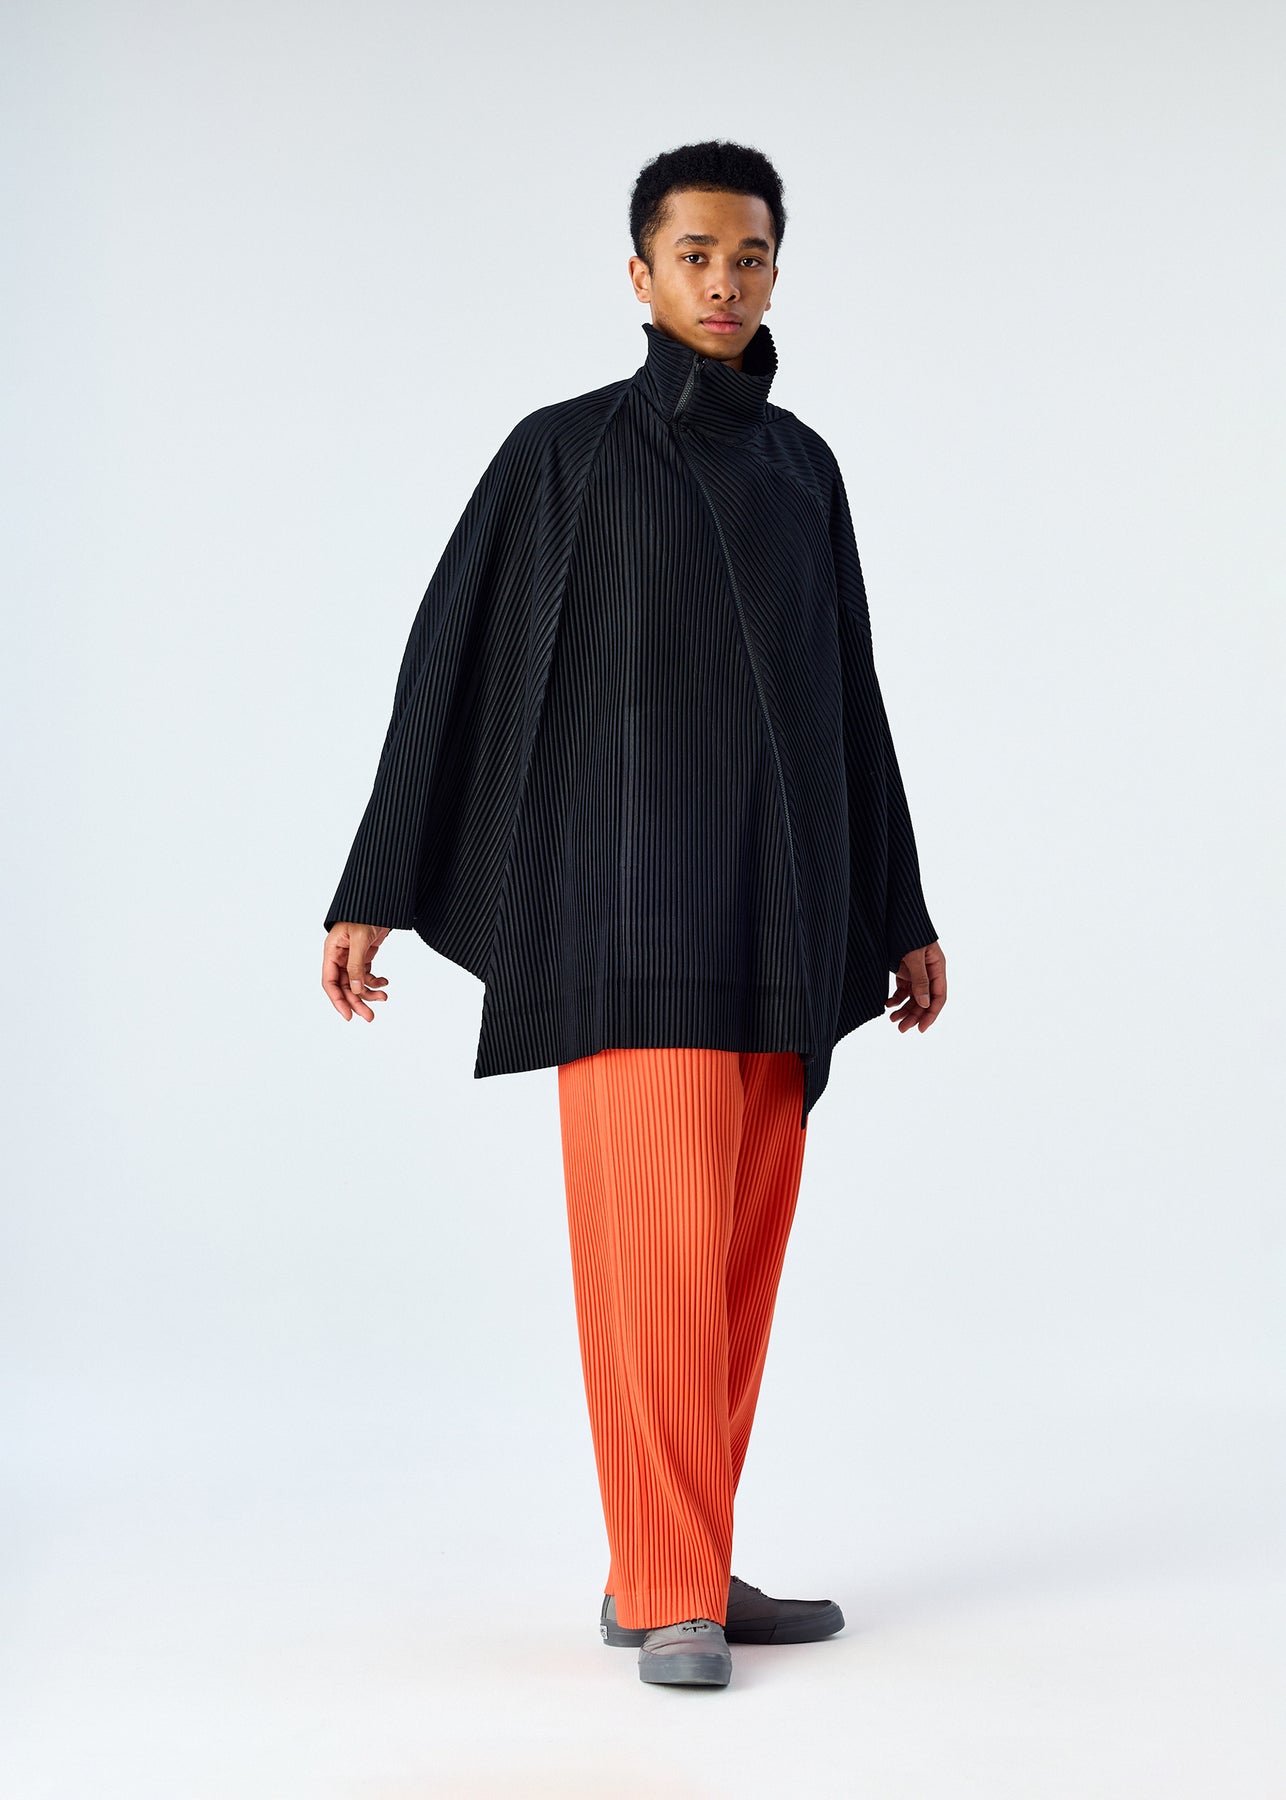 THREE BY SIX JACKET | The official ISSEY MIYAKE ONLINE STORE